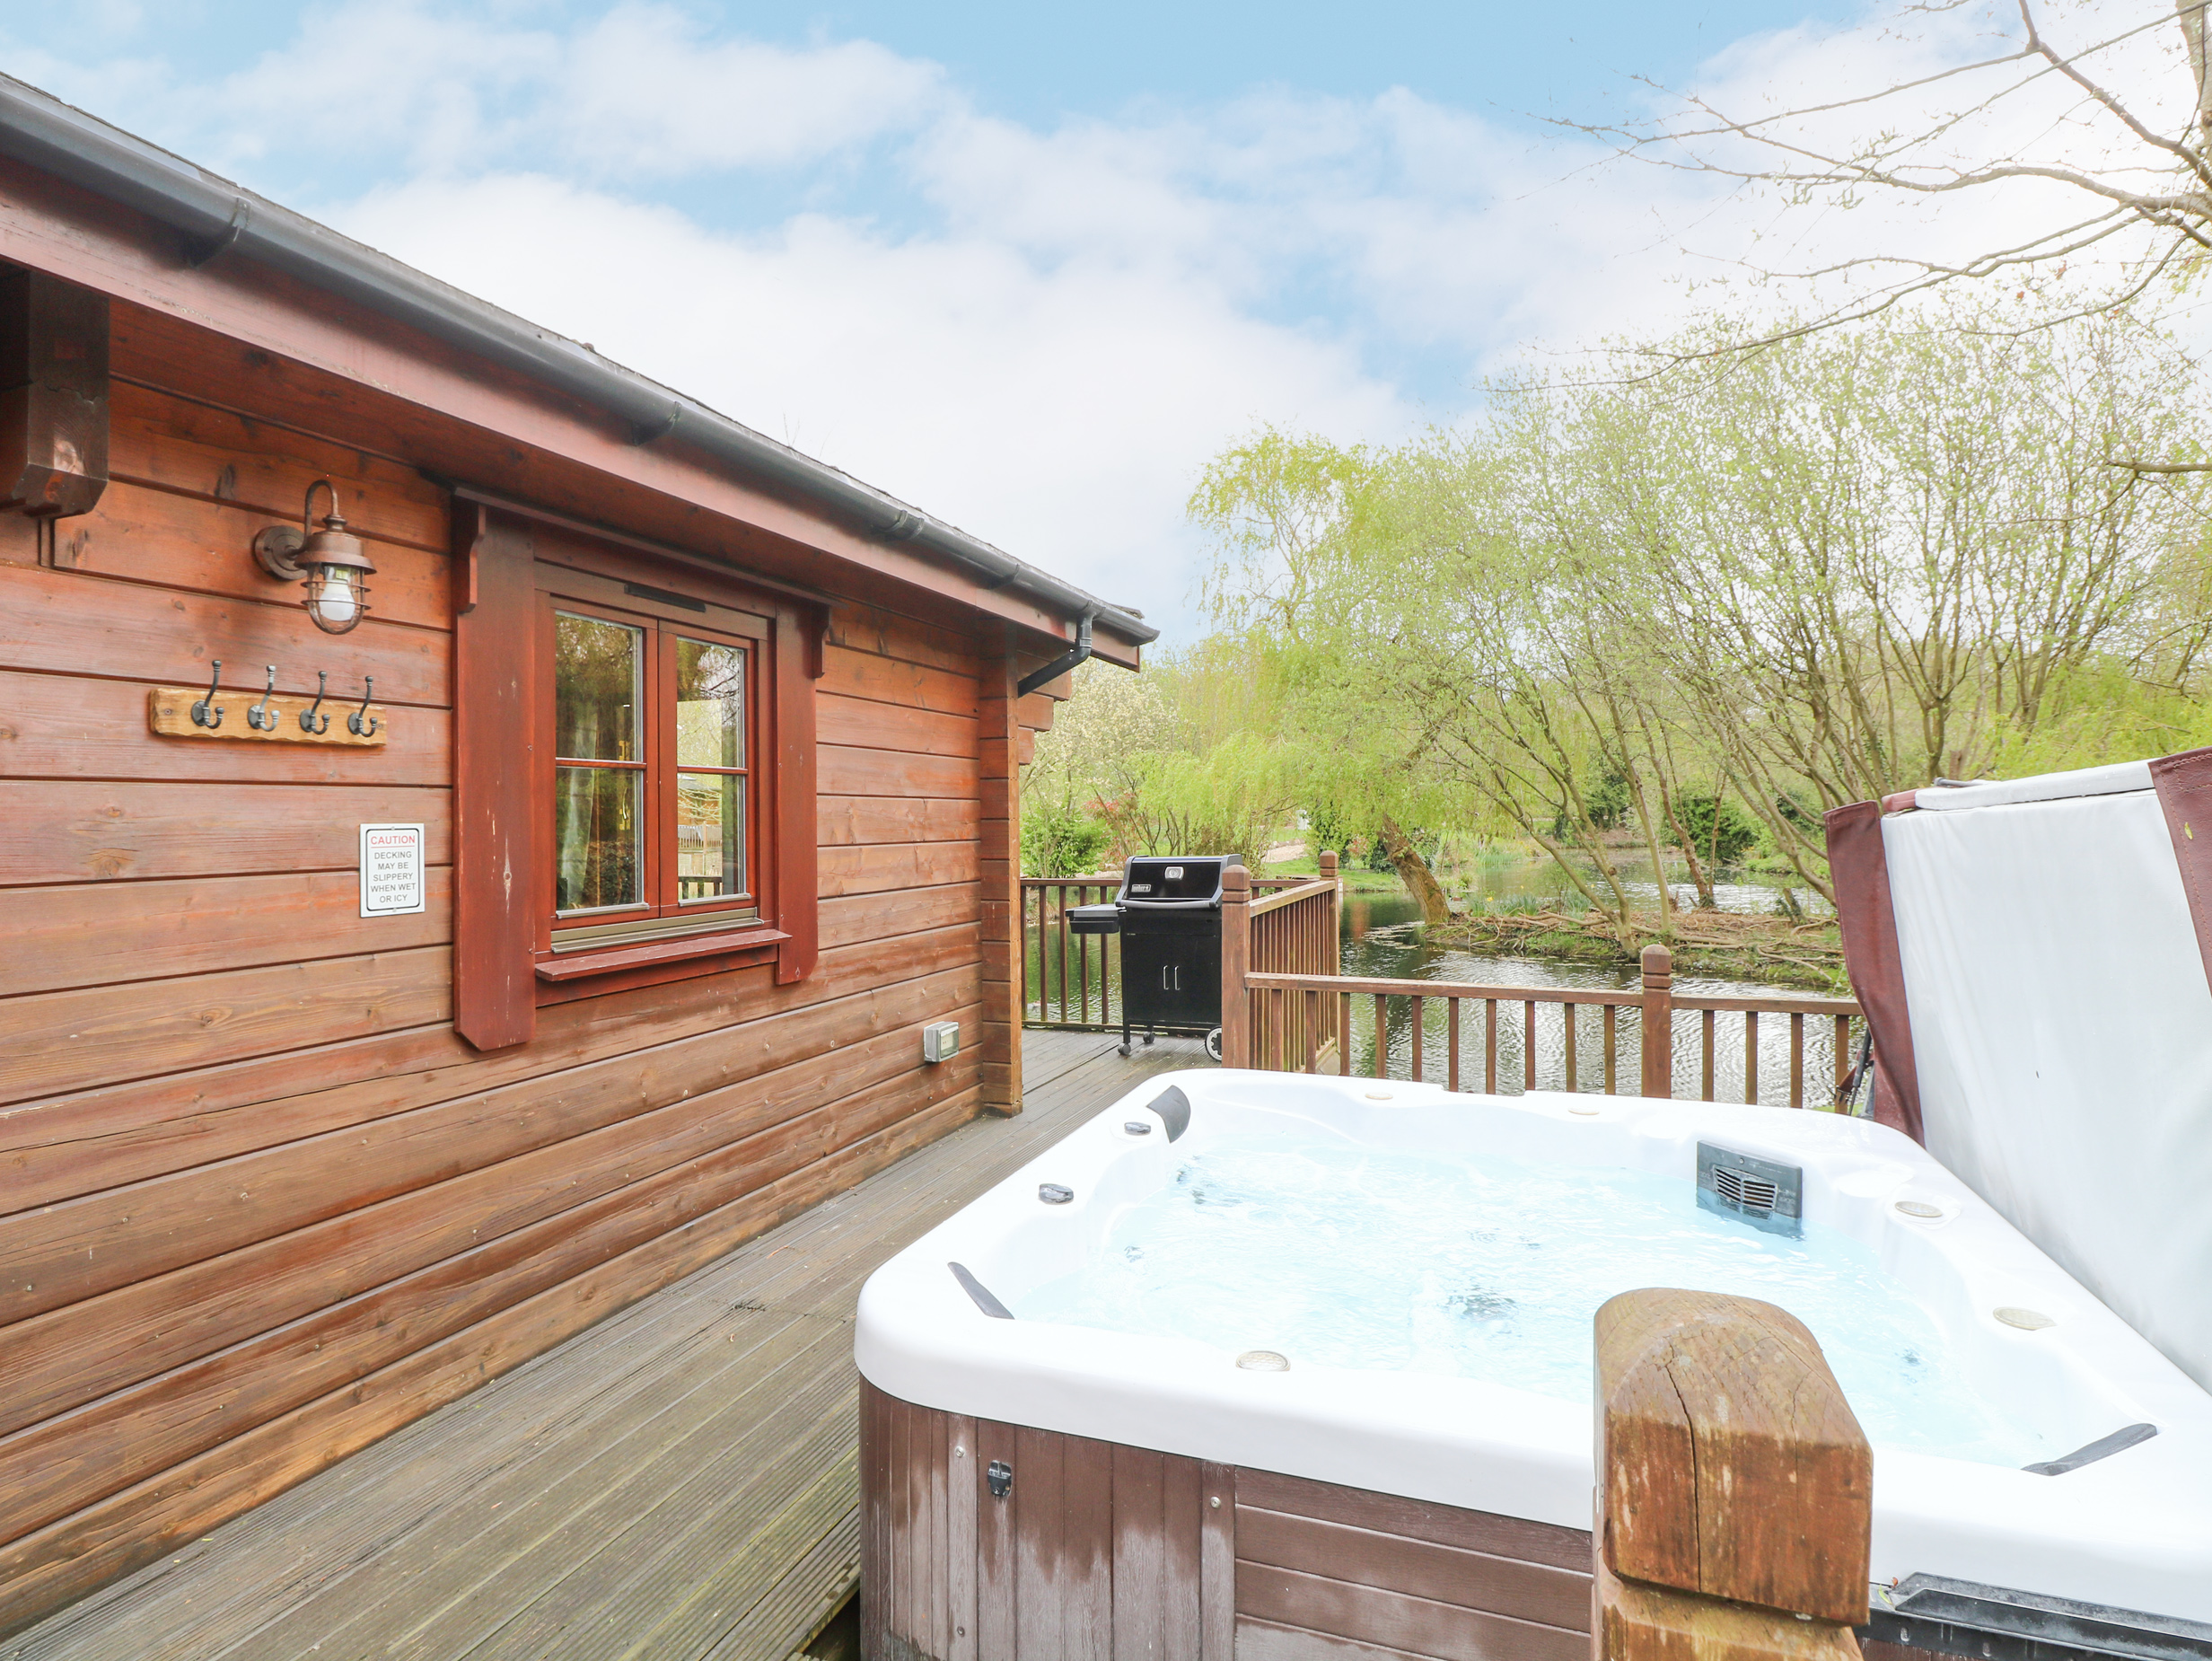 Kingfisher Lodge, in Badwell Ash in Suffolk. Lakeside cabin. Adults only. Remote. Hot tub. Barbecue.